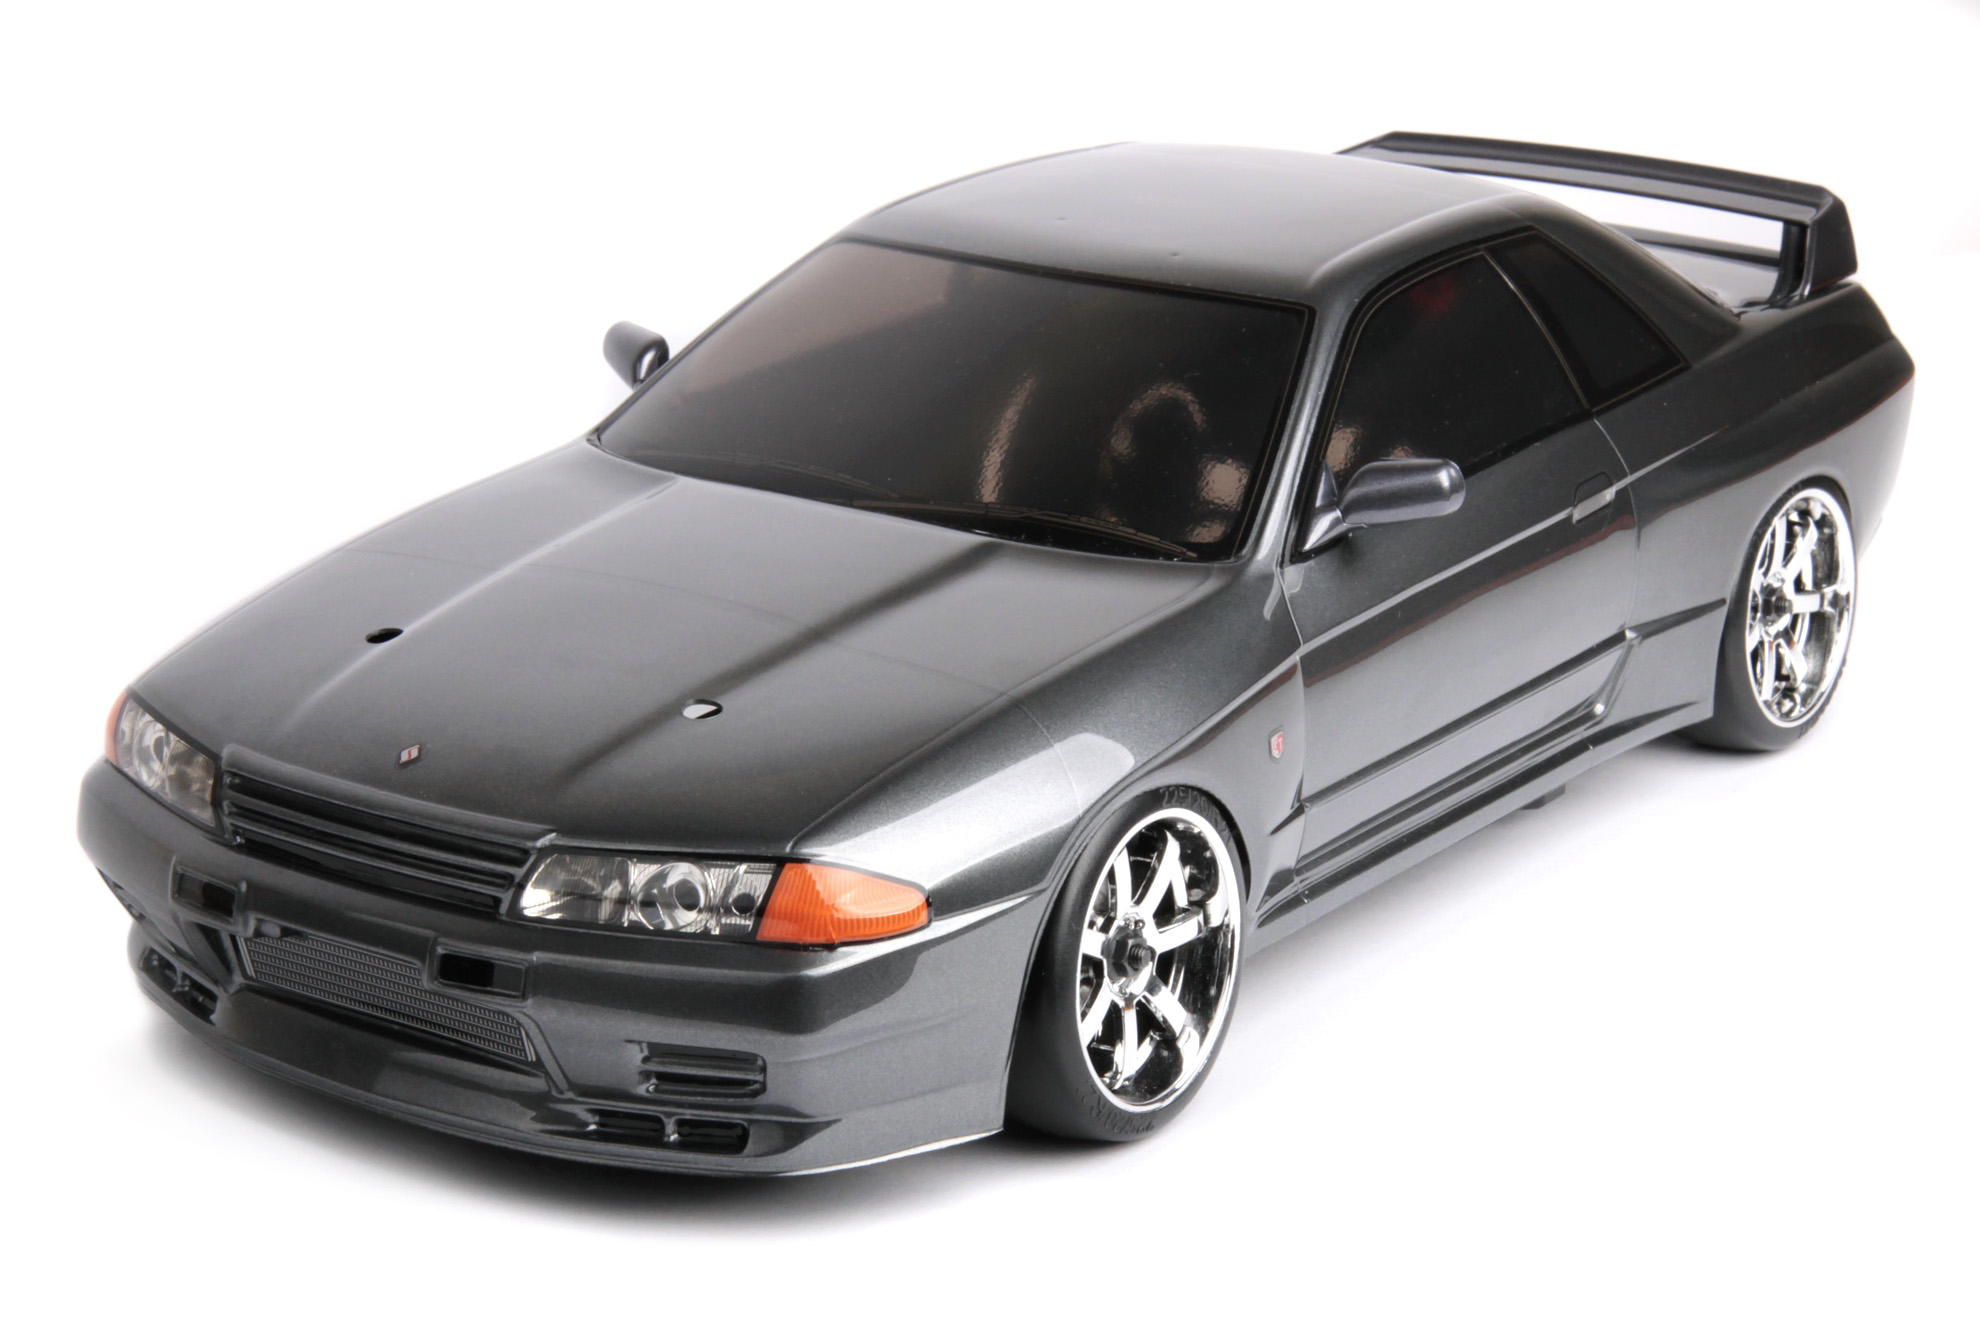 FXX-D 1/10 Scale 2WD RTR Electric Drift Car (2.4G) (brushless) NISSAN R32 GT-R